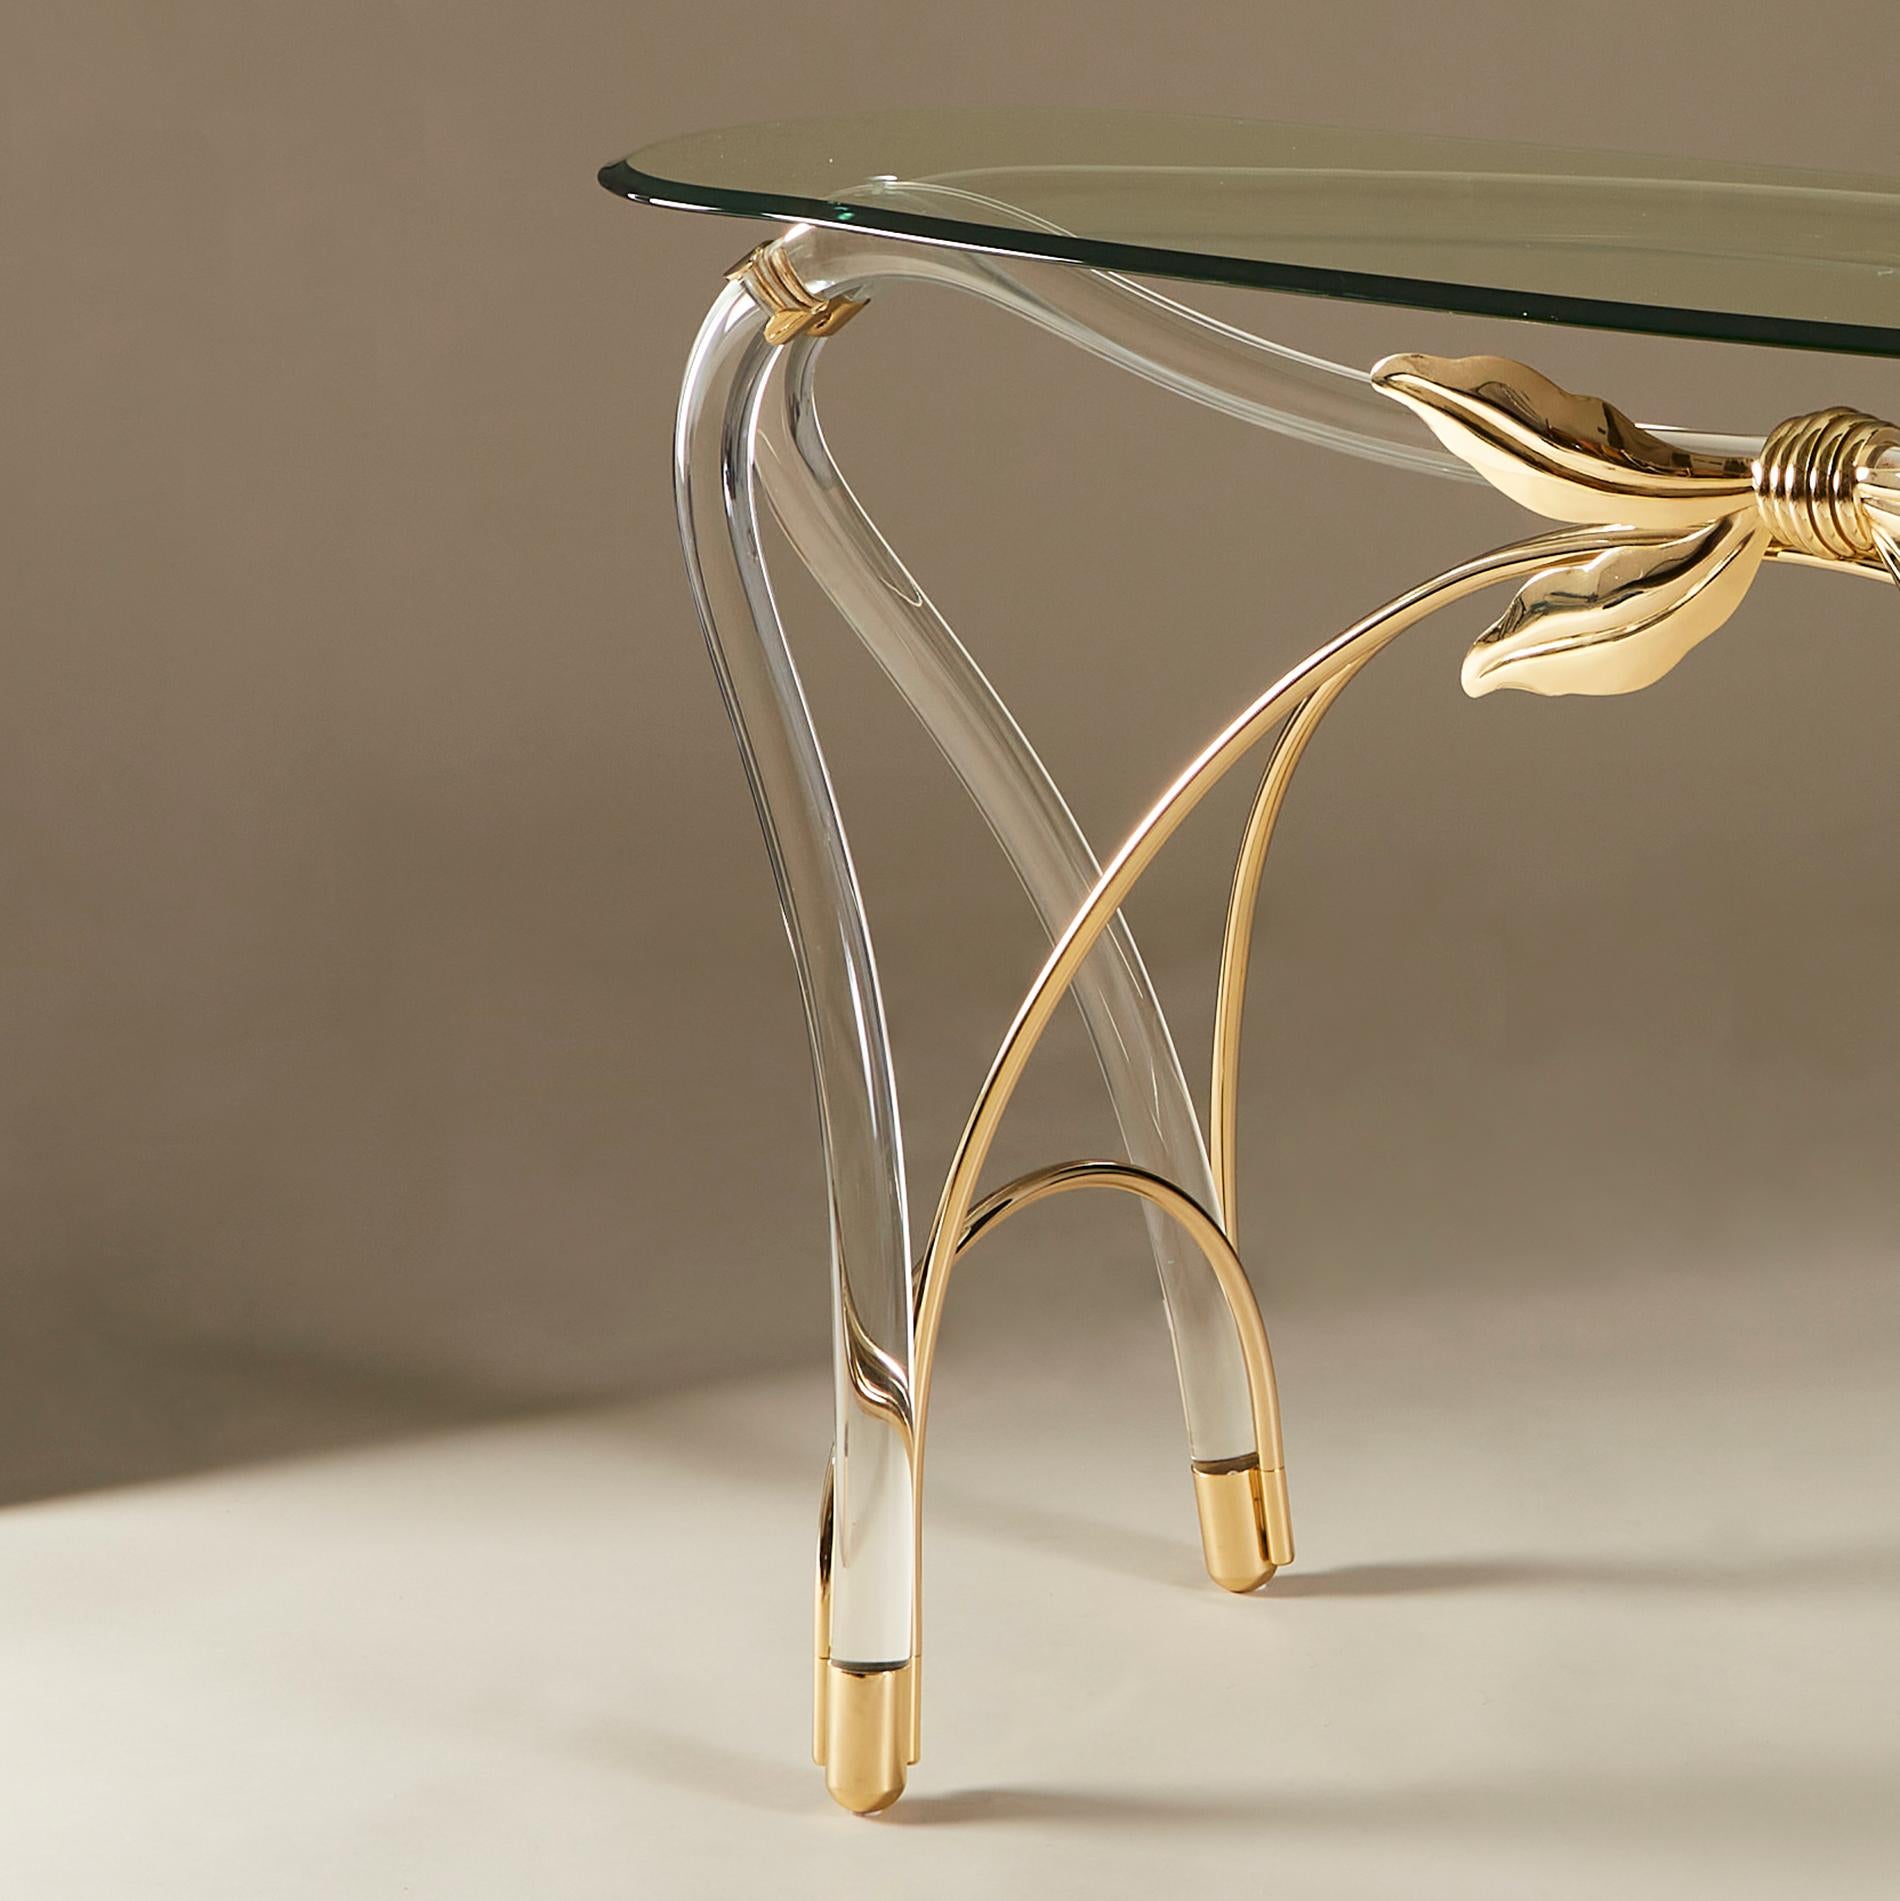 Elegant well proportioned 1970s console table in the style of Jeff Messerschmidt. Unusual curved Lucite shapes form both the base and legs of the piece. A large decorative gold metal bow enhances the design with more gold detailing extending down to